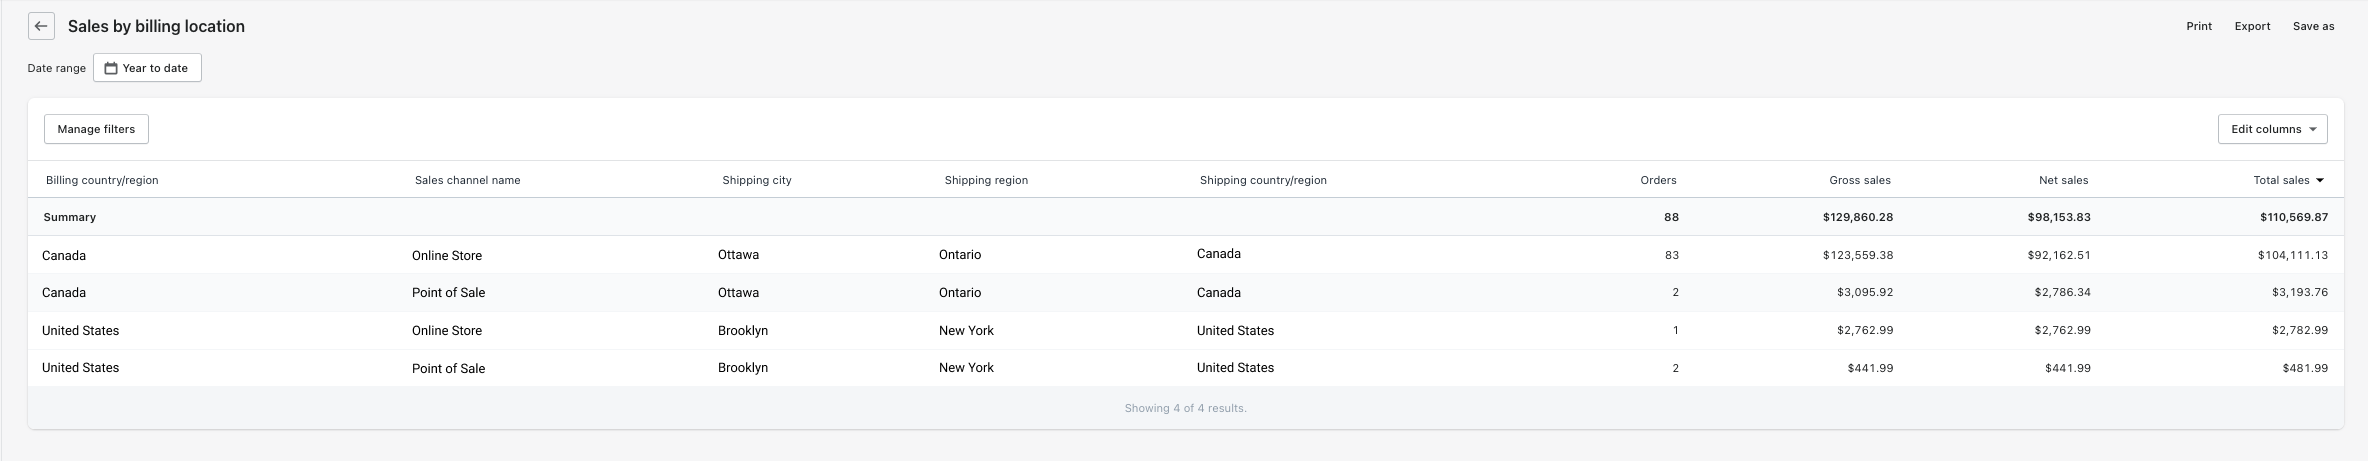 Shopify’s Sales by billing location report showing a lift in online sales near point-of-sale locations.